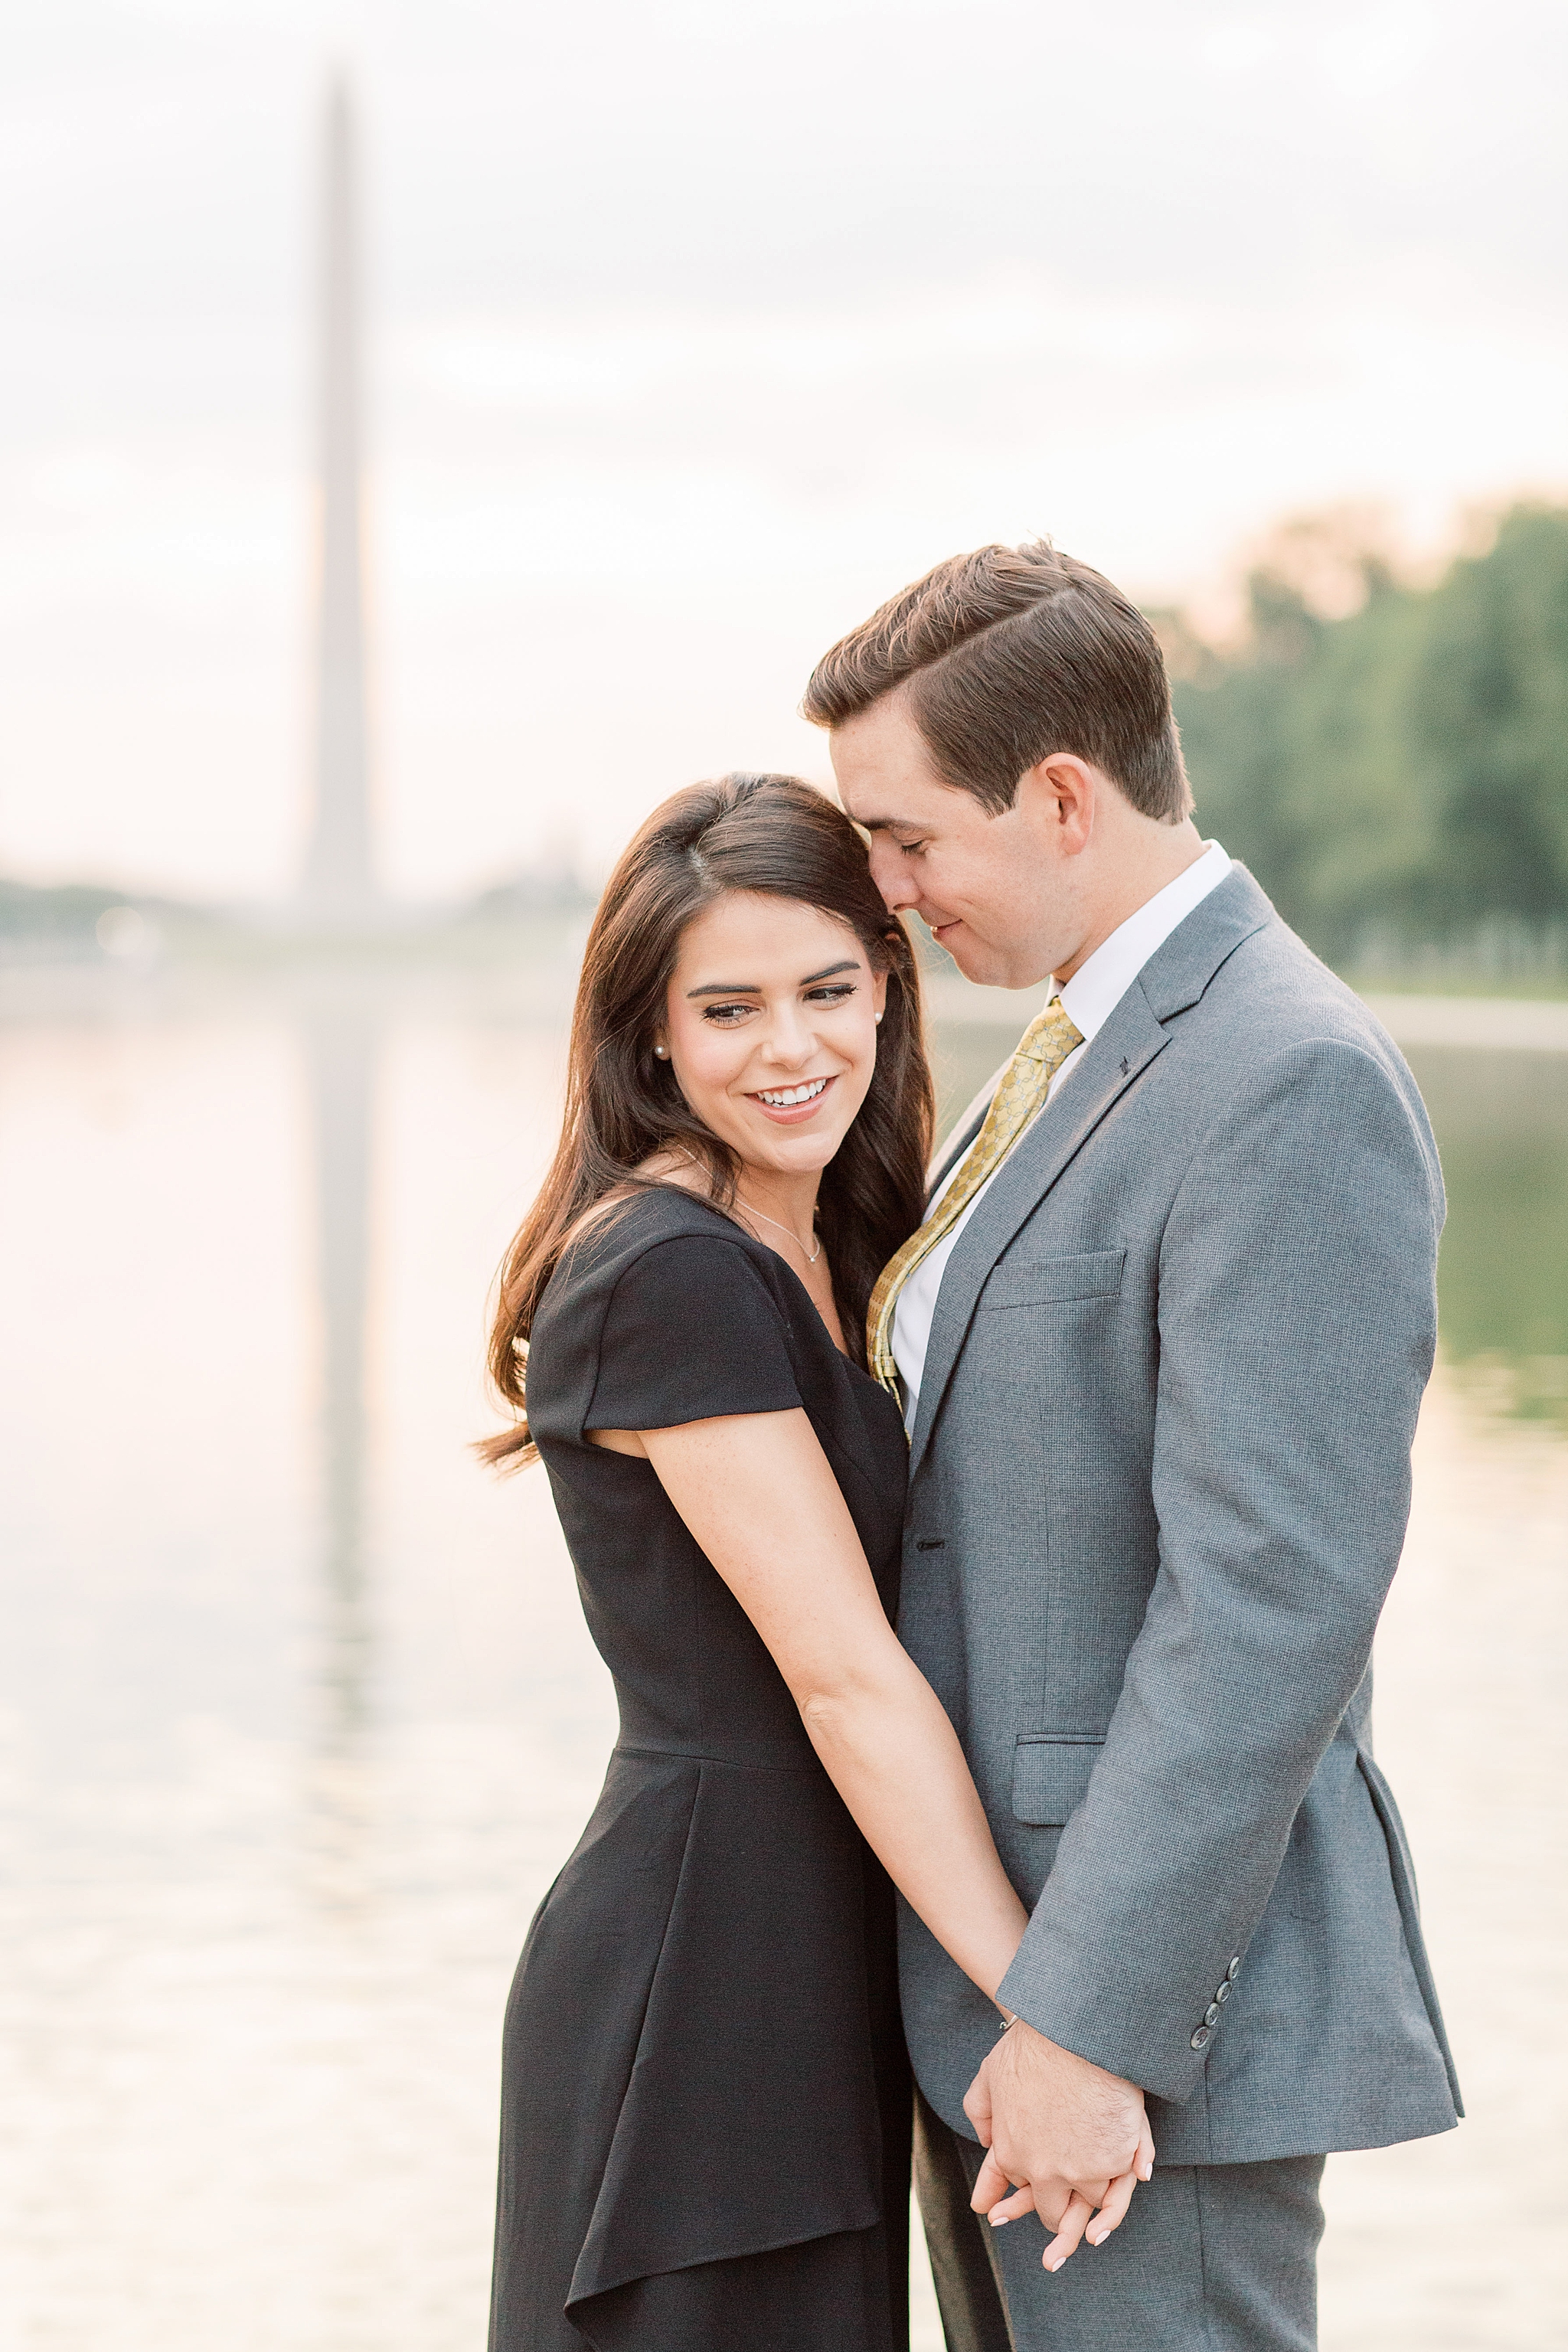 A stunning sunrise engagement session in Washington, DC at locations including the Lincoln Memorial, Constitution Gardens, and DC War Memorial.